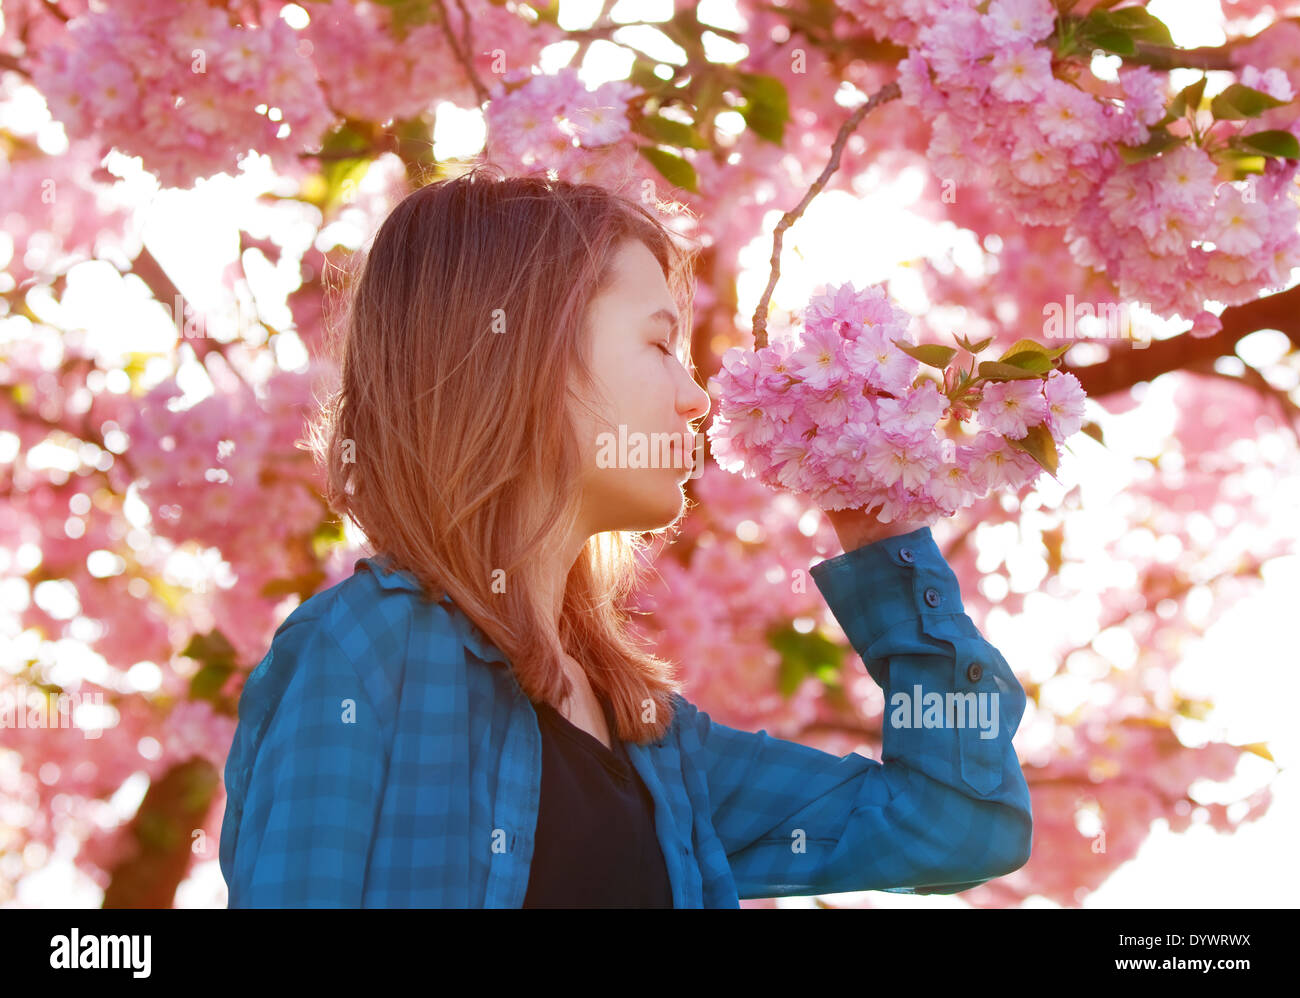 young girl smelling pink blossoms Stock Photo